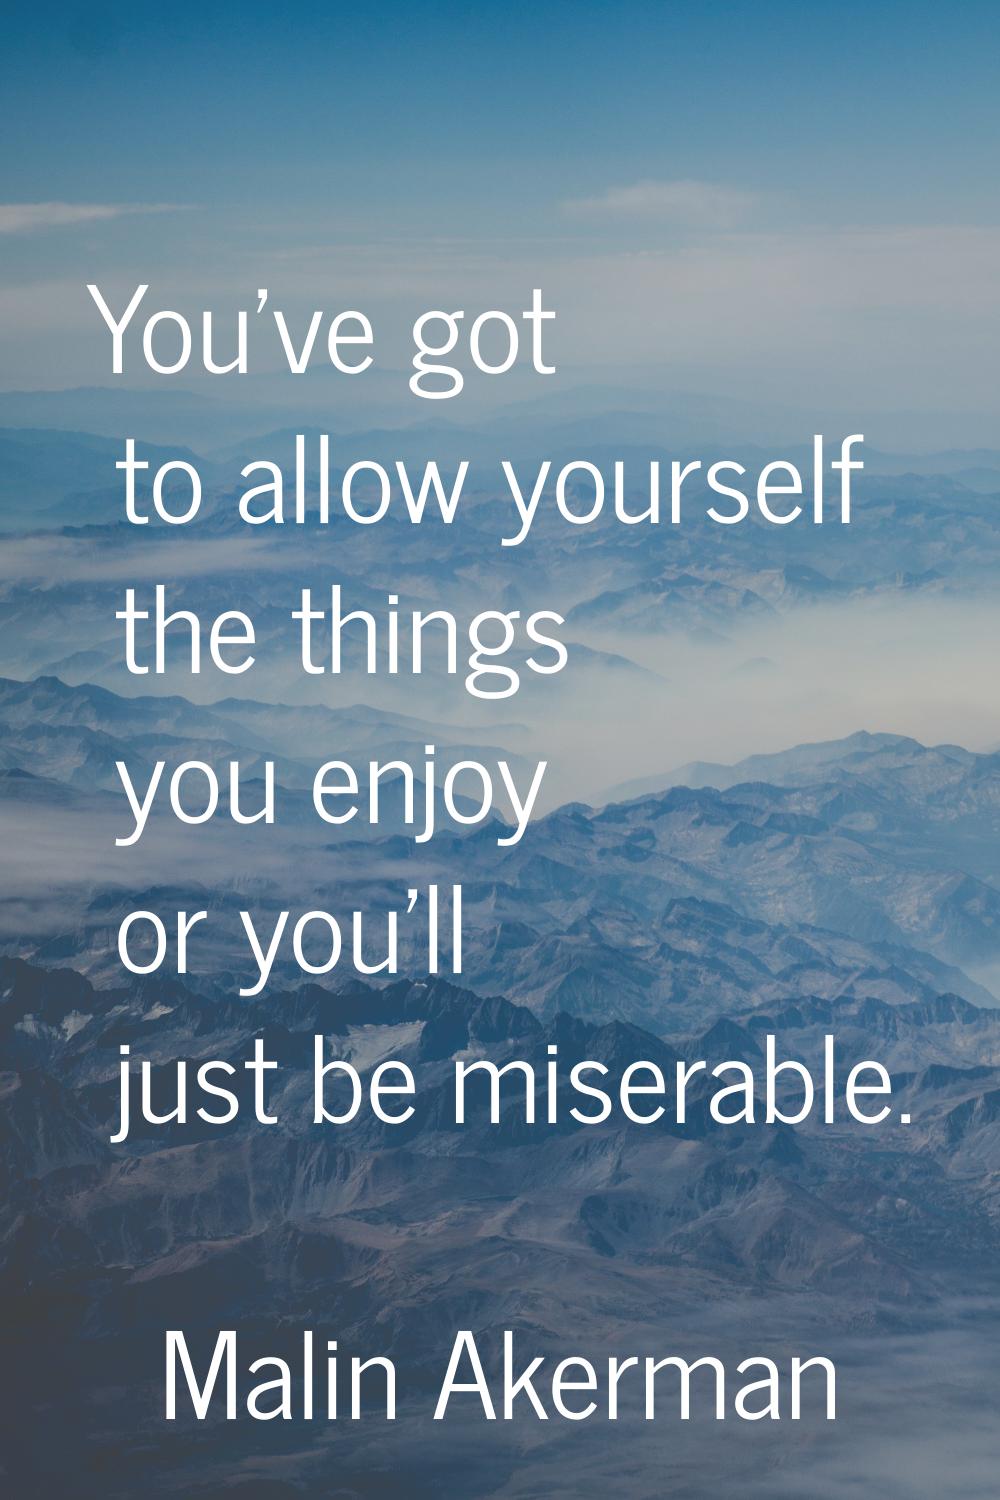 You've got to allow yourself the things you enjoy or you'll just be miserable.